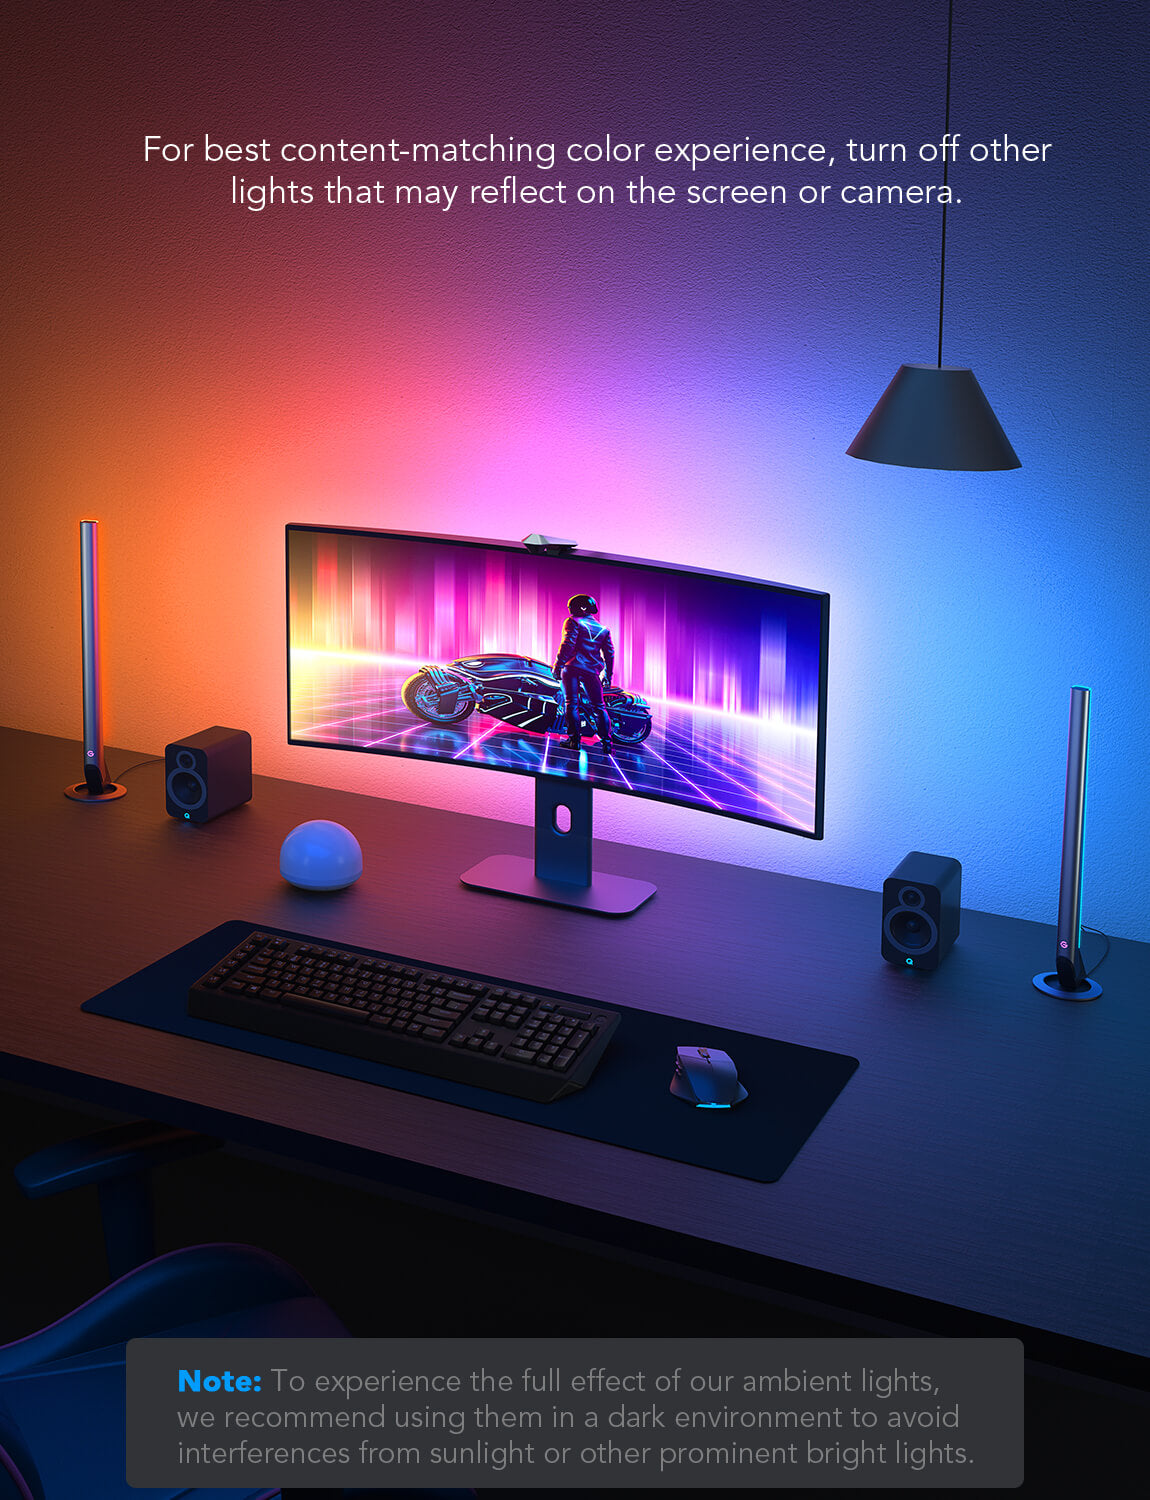 Govee DreamView G1 Pro Gaming Light